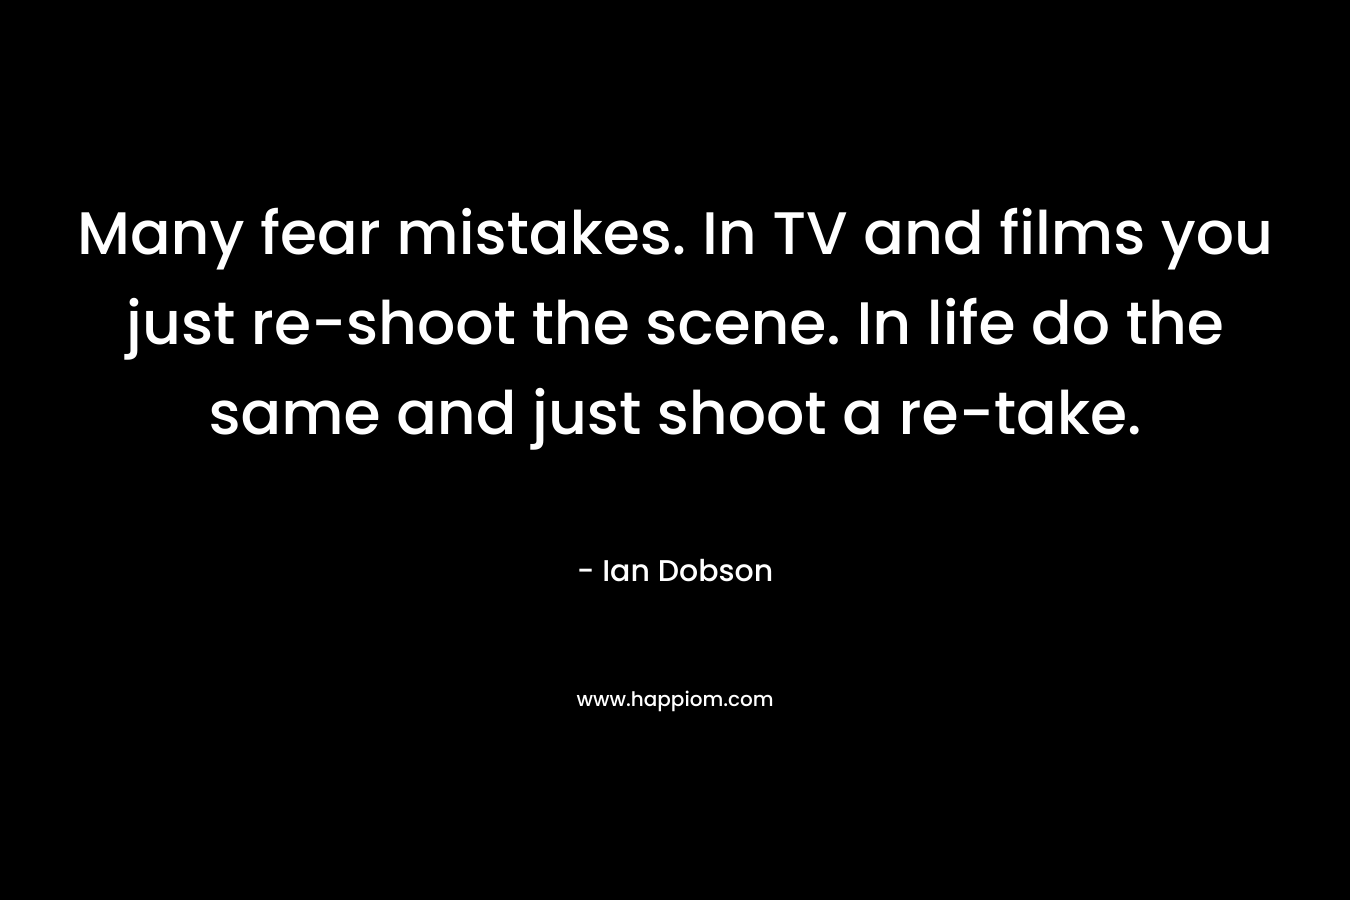 Many fear mistakes. In TV and films you just re-shoot the scene. In life do the same and just shoot a re-take. – Ian Dobson